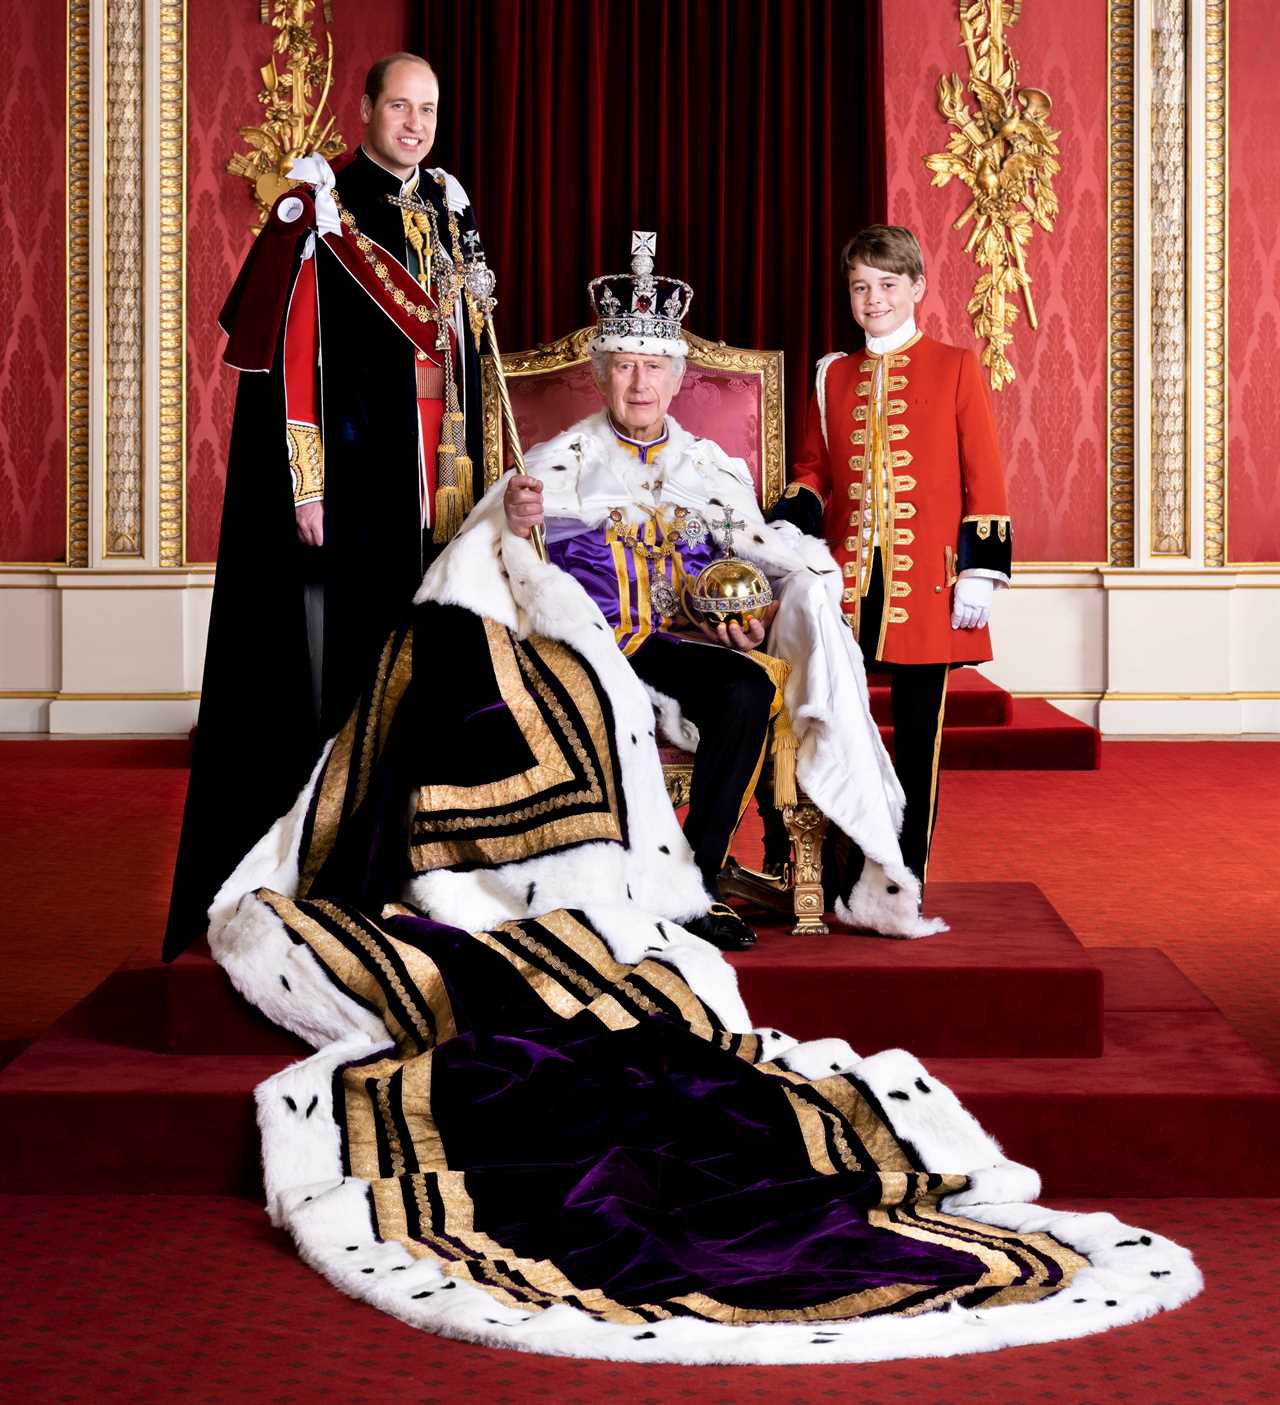 Newly crowned King Charles III proudly sits on throne flanked by two heirs Prince William & Prince George in new photo